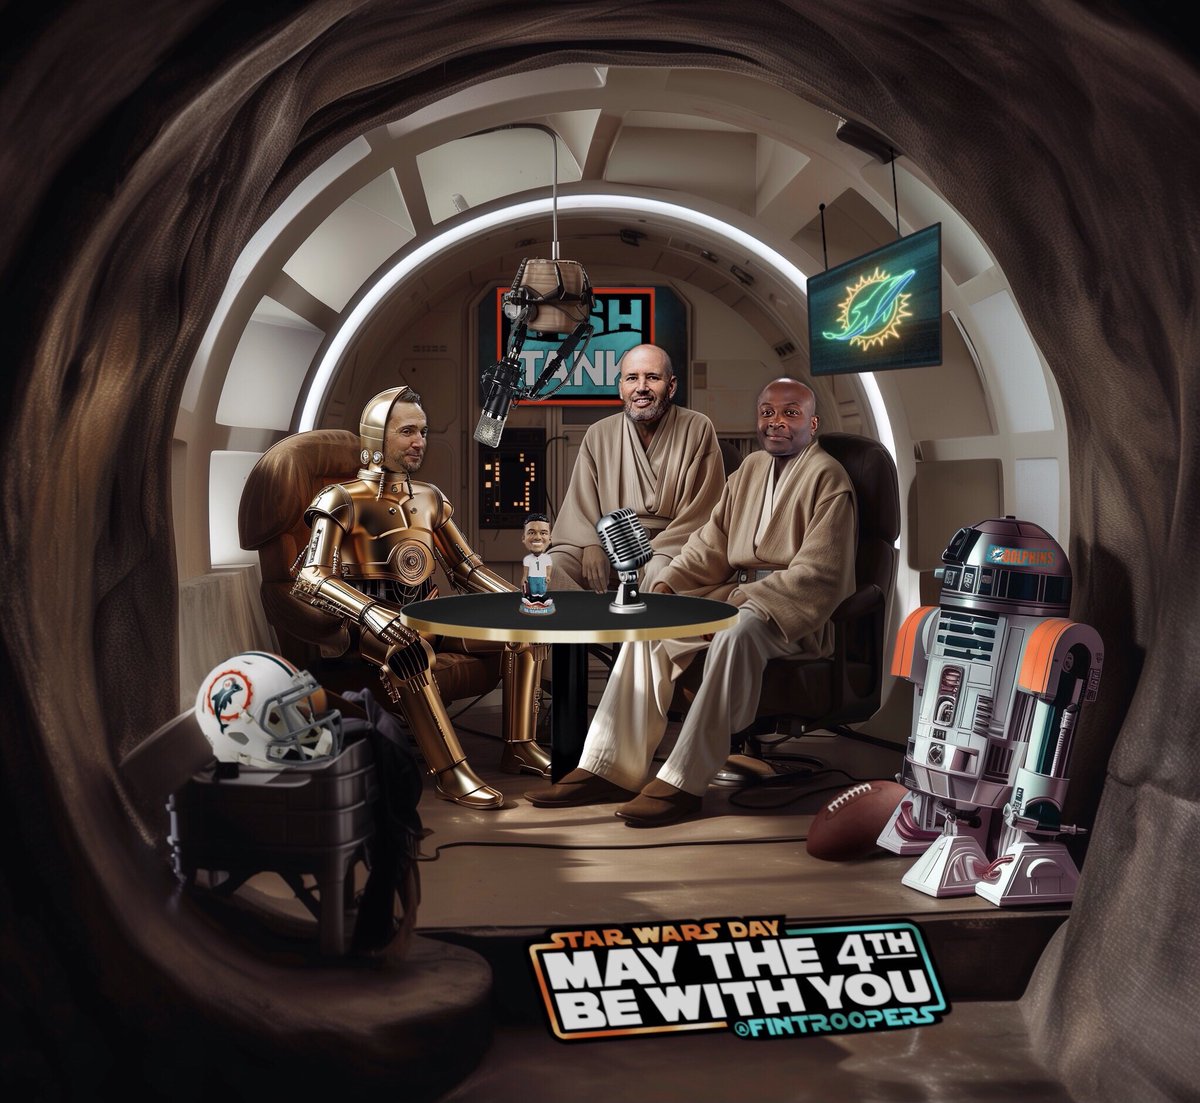 On behalf of your friends in a podcast network far, far, away...#MayThe4thBeWithYou @MiamiDolphins @ojmcduffie81 @WingfieldNFL @TeamLevit Shoutout to @fintroopers for another brilliant work of art!